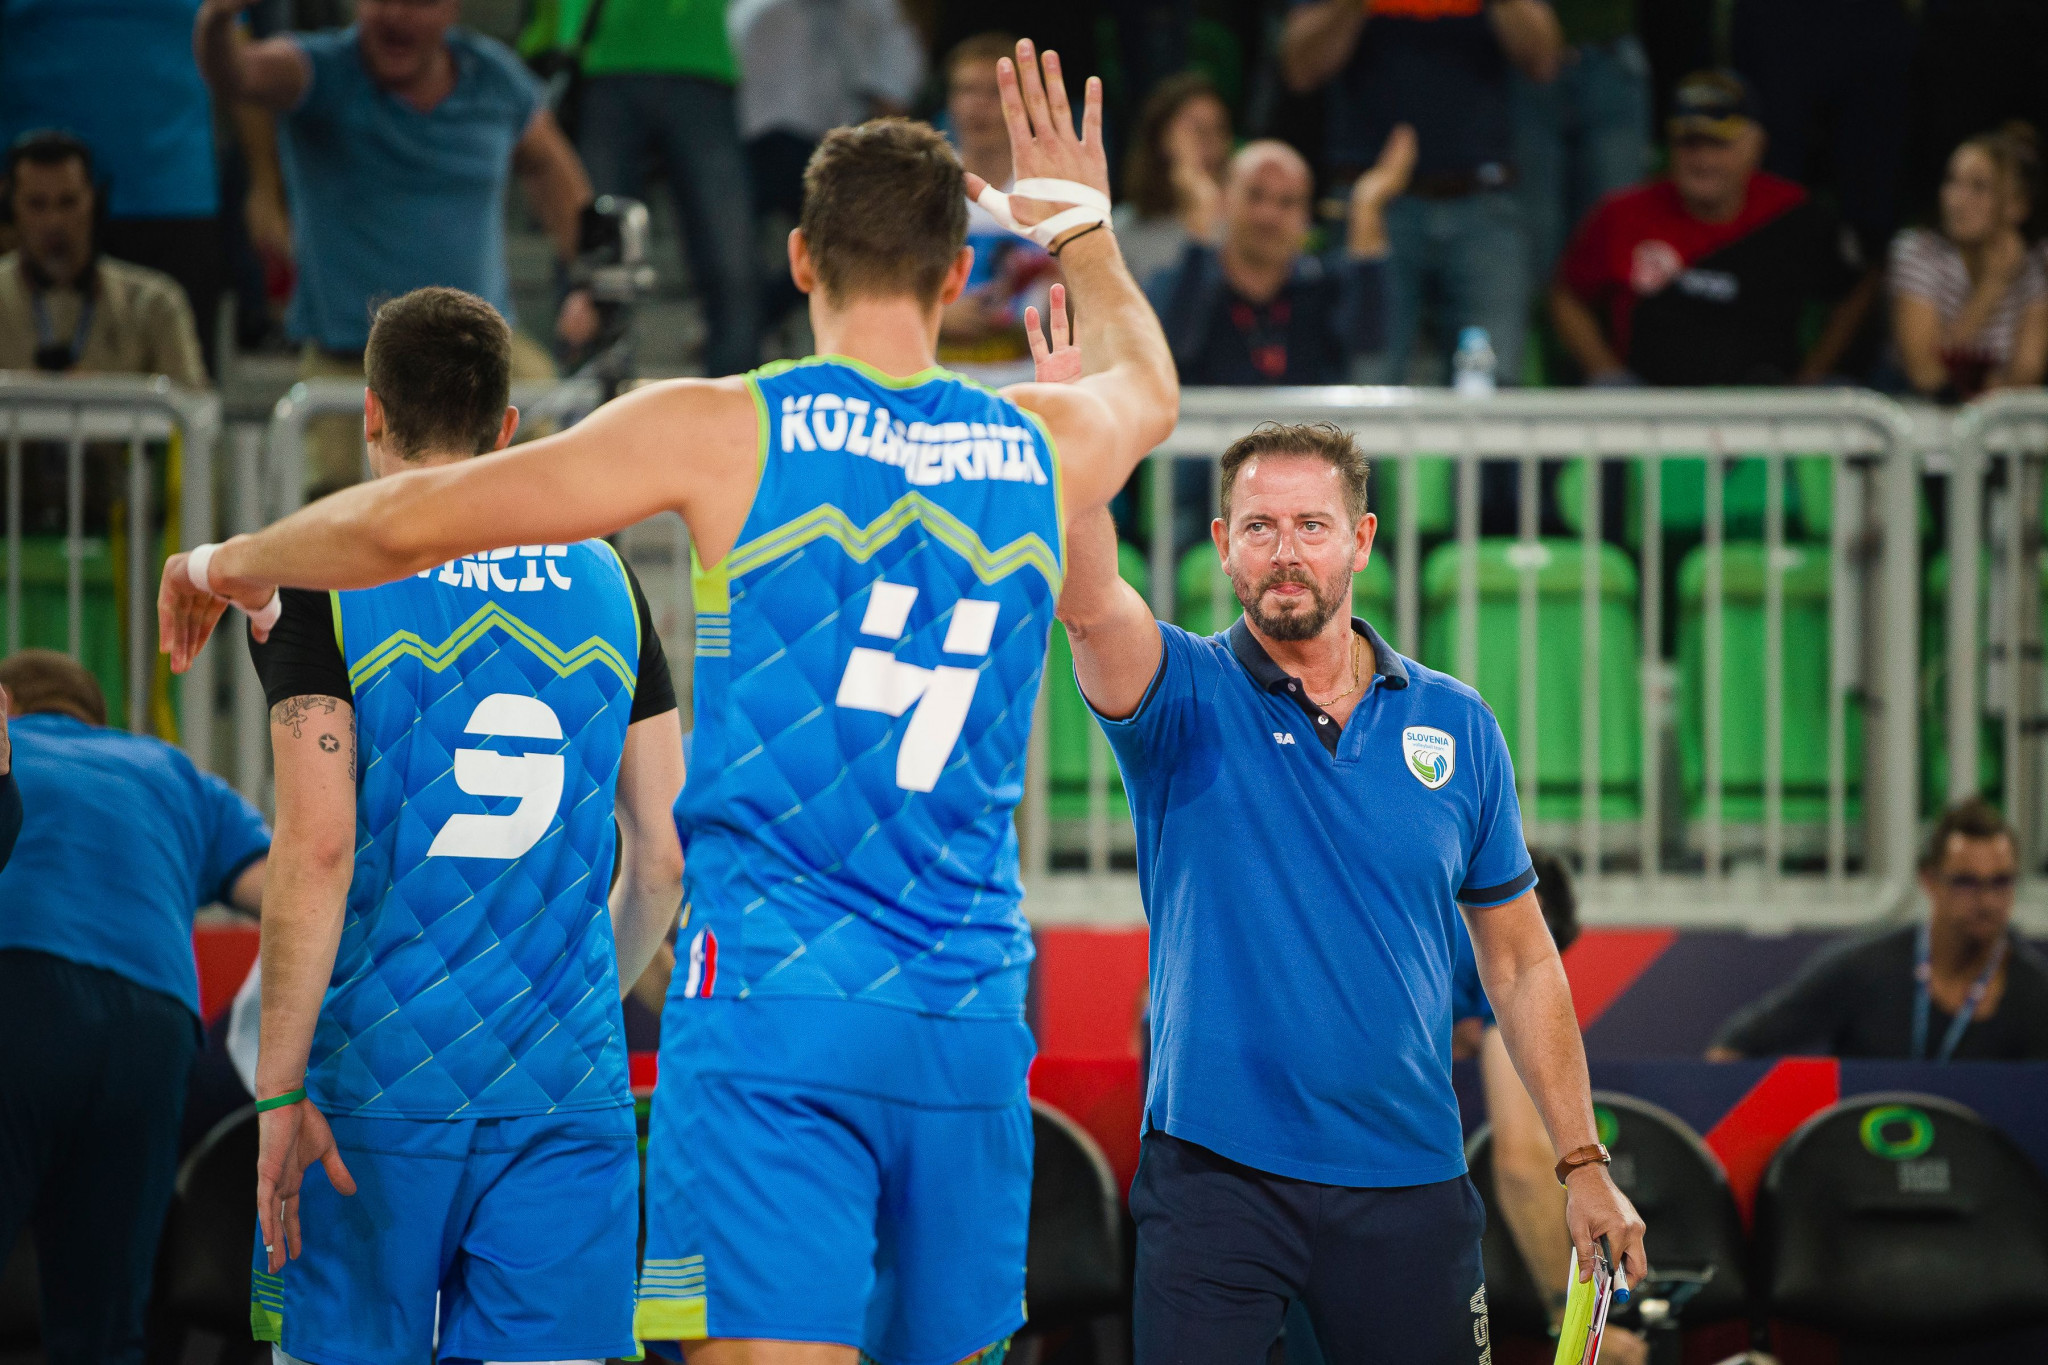 Co-hosts Slovenia have reached the final of the men's European Volleyball Championship after beating world champions Poland ©Getty Images